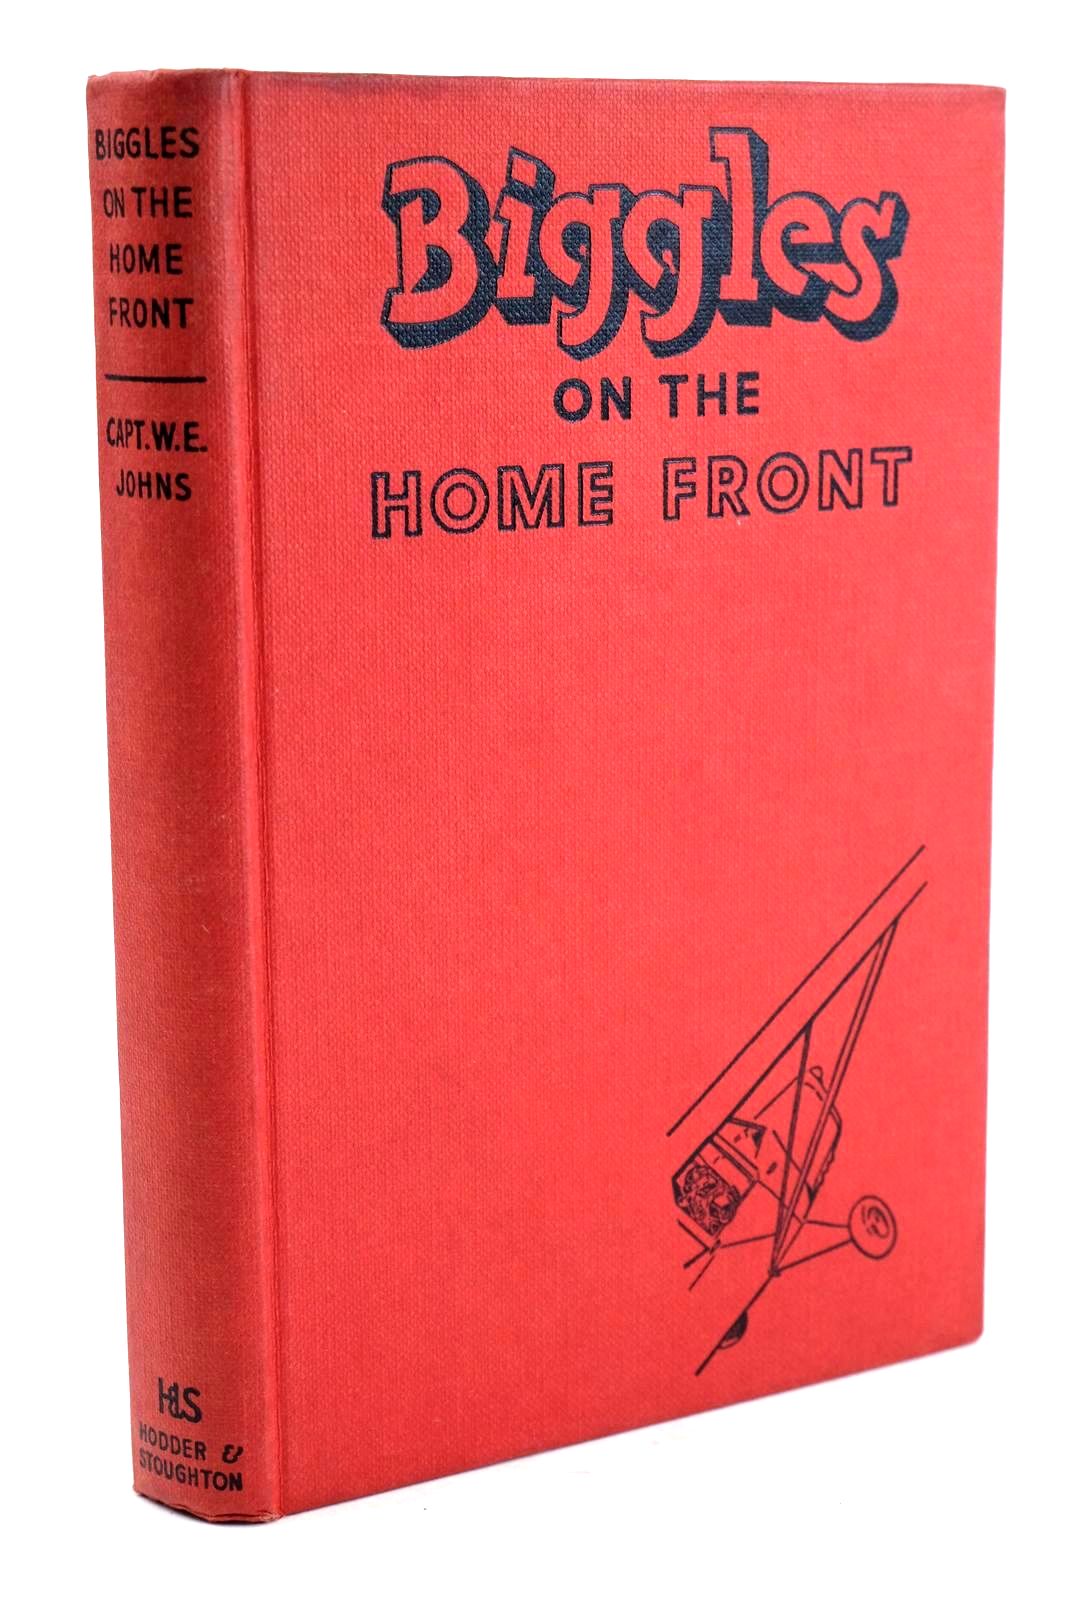 Photo of BIGGLES ON THE HOME FRONT written by Johns, W.E. illustrated by Stead,  published by Hodder &amp; Stoughton (STOCK CODE: 1324256)  for sale by Stella & Rose's Books